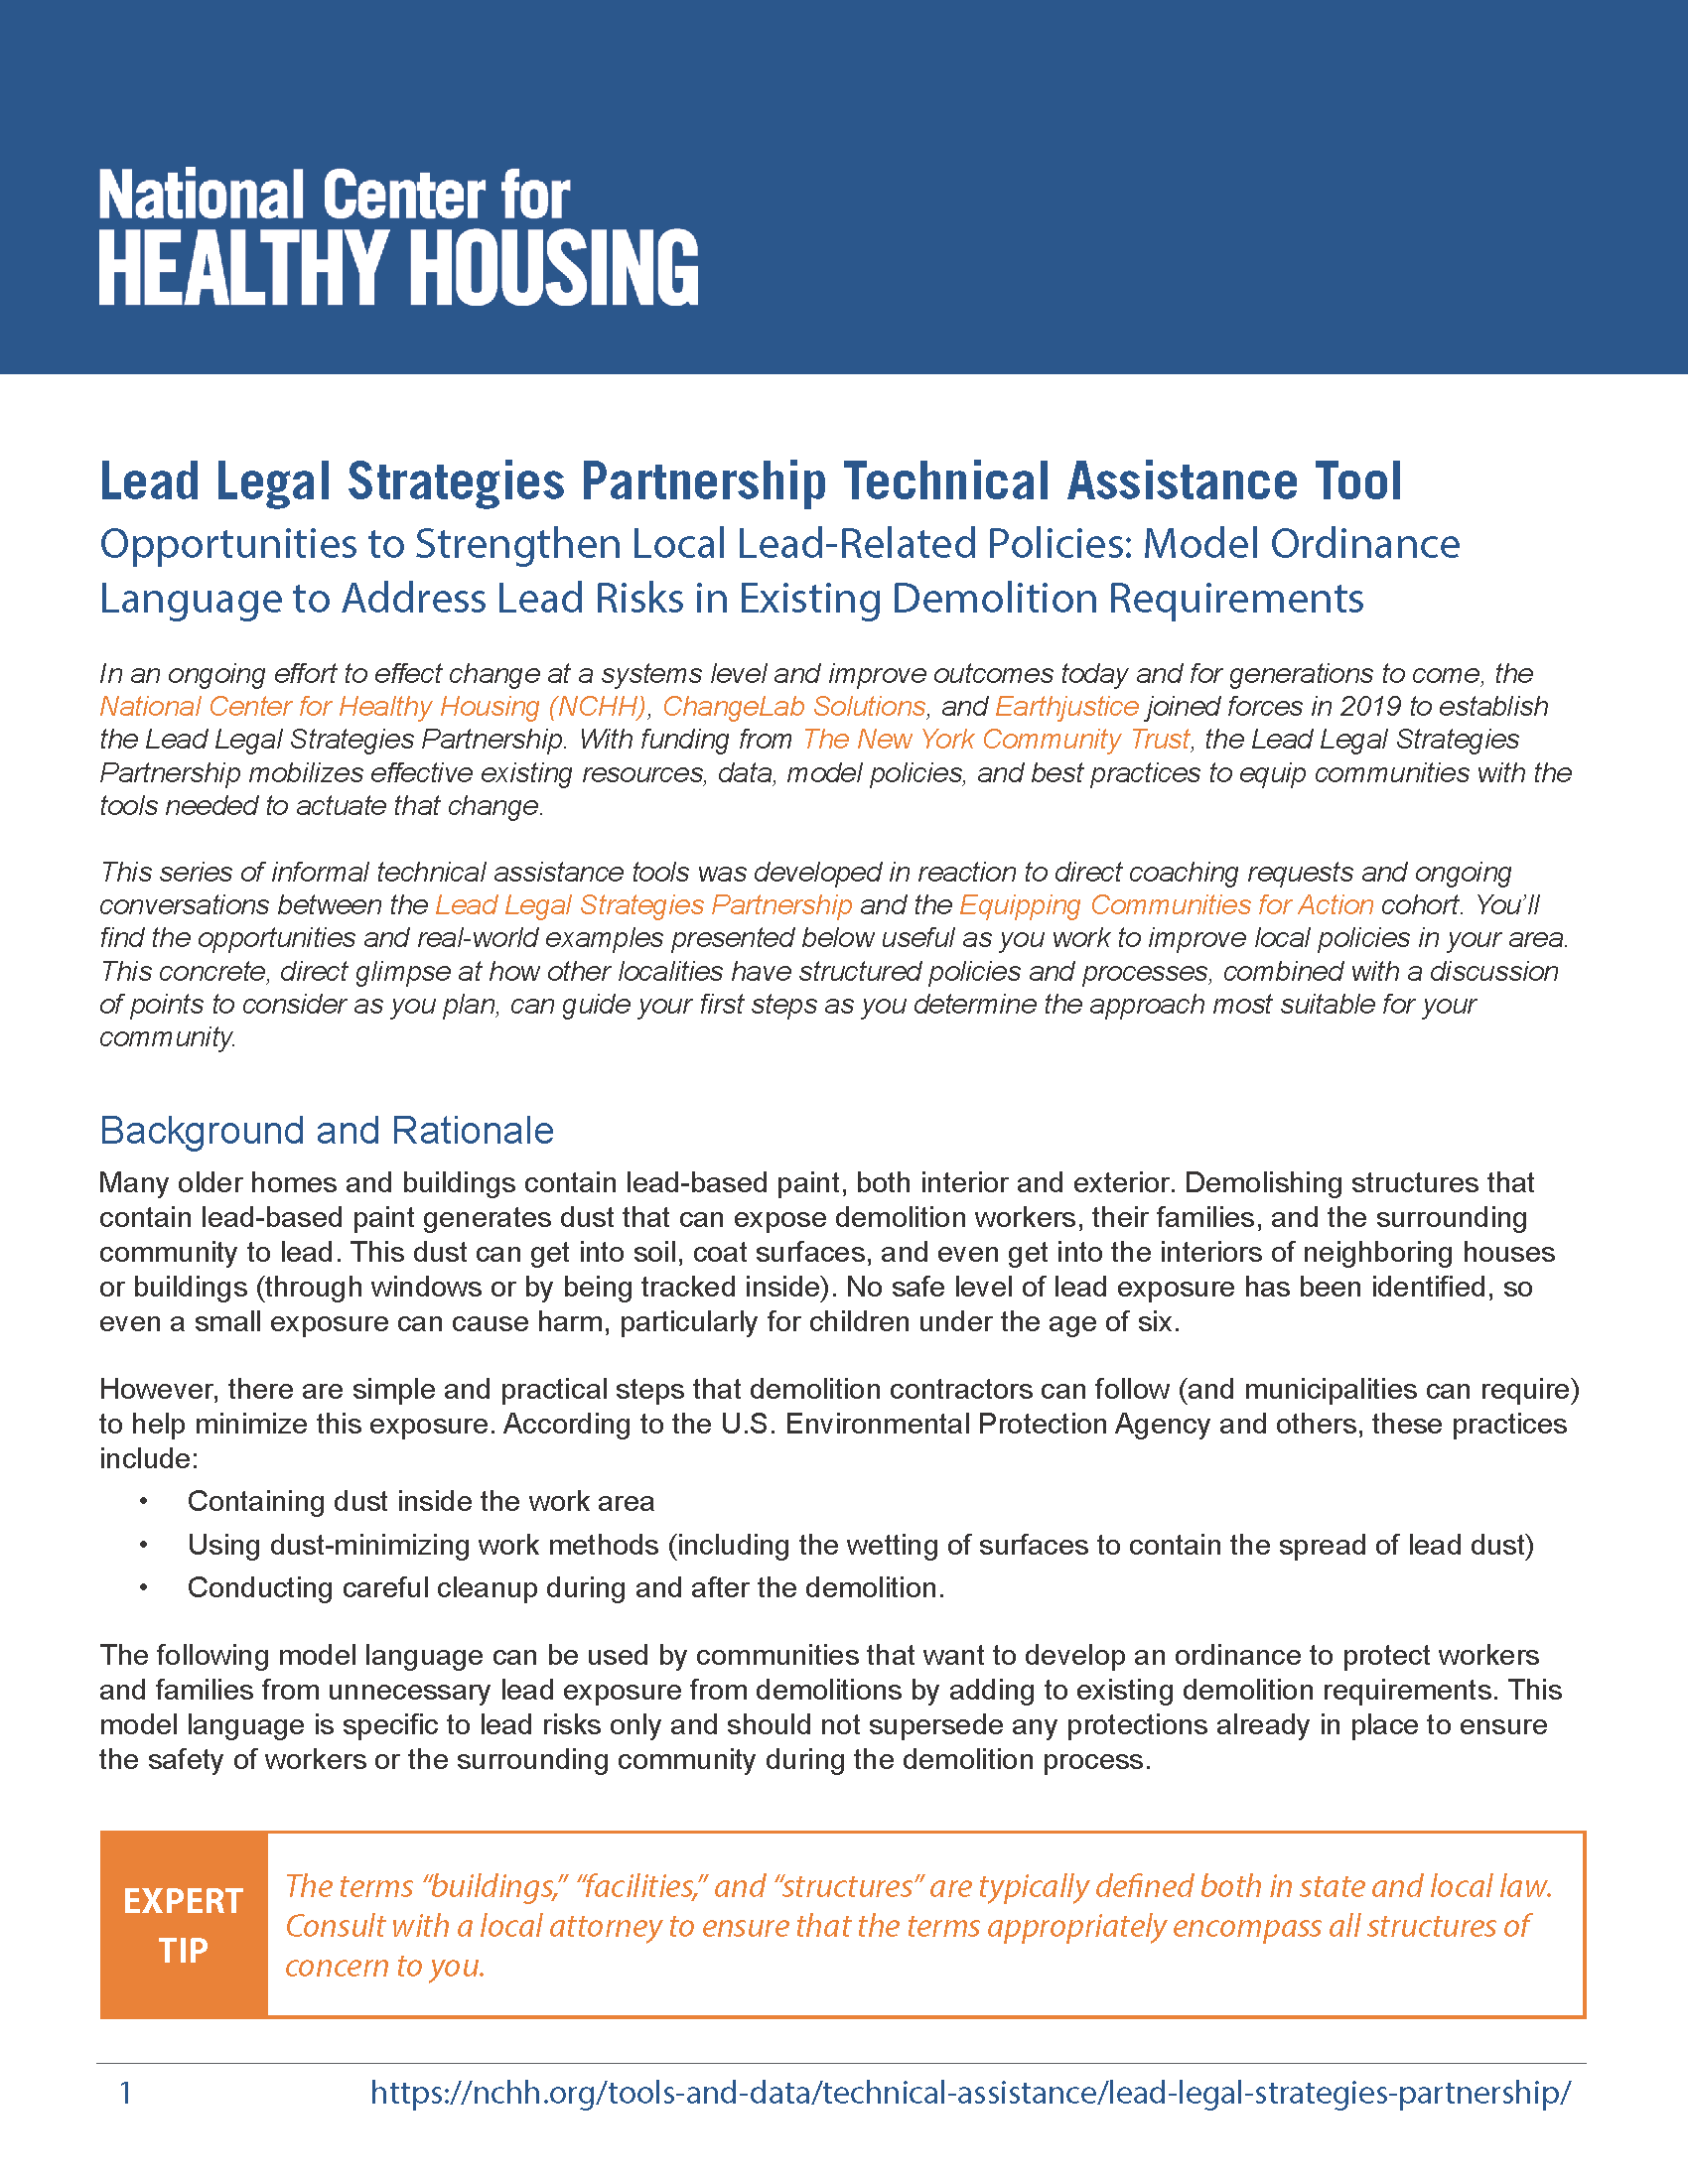 Opportunities to Strengthen Local Lead-Related Policies: Model Ordinance Language to Address Lead Risks in Existing Demolition Requirements